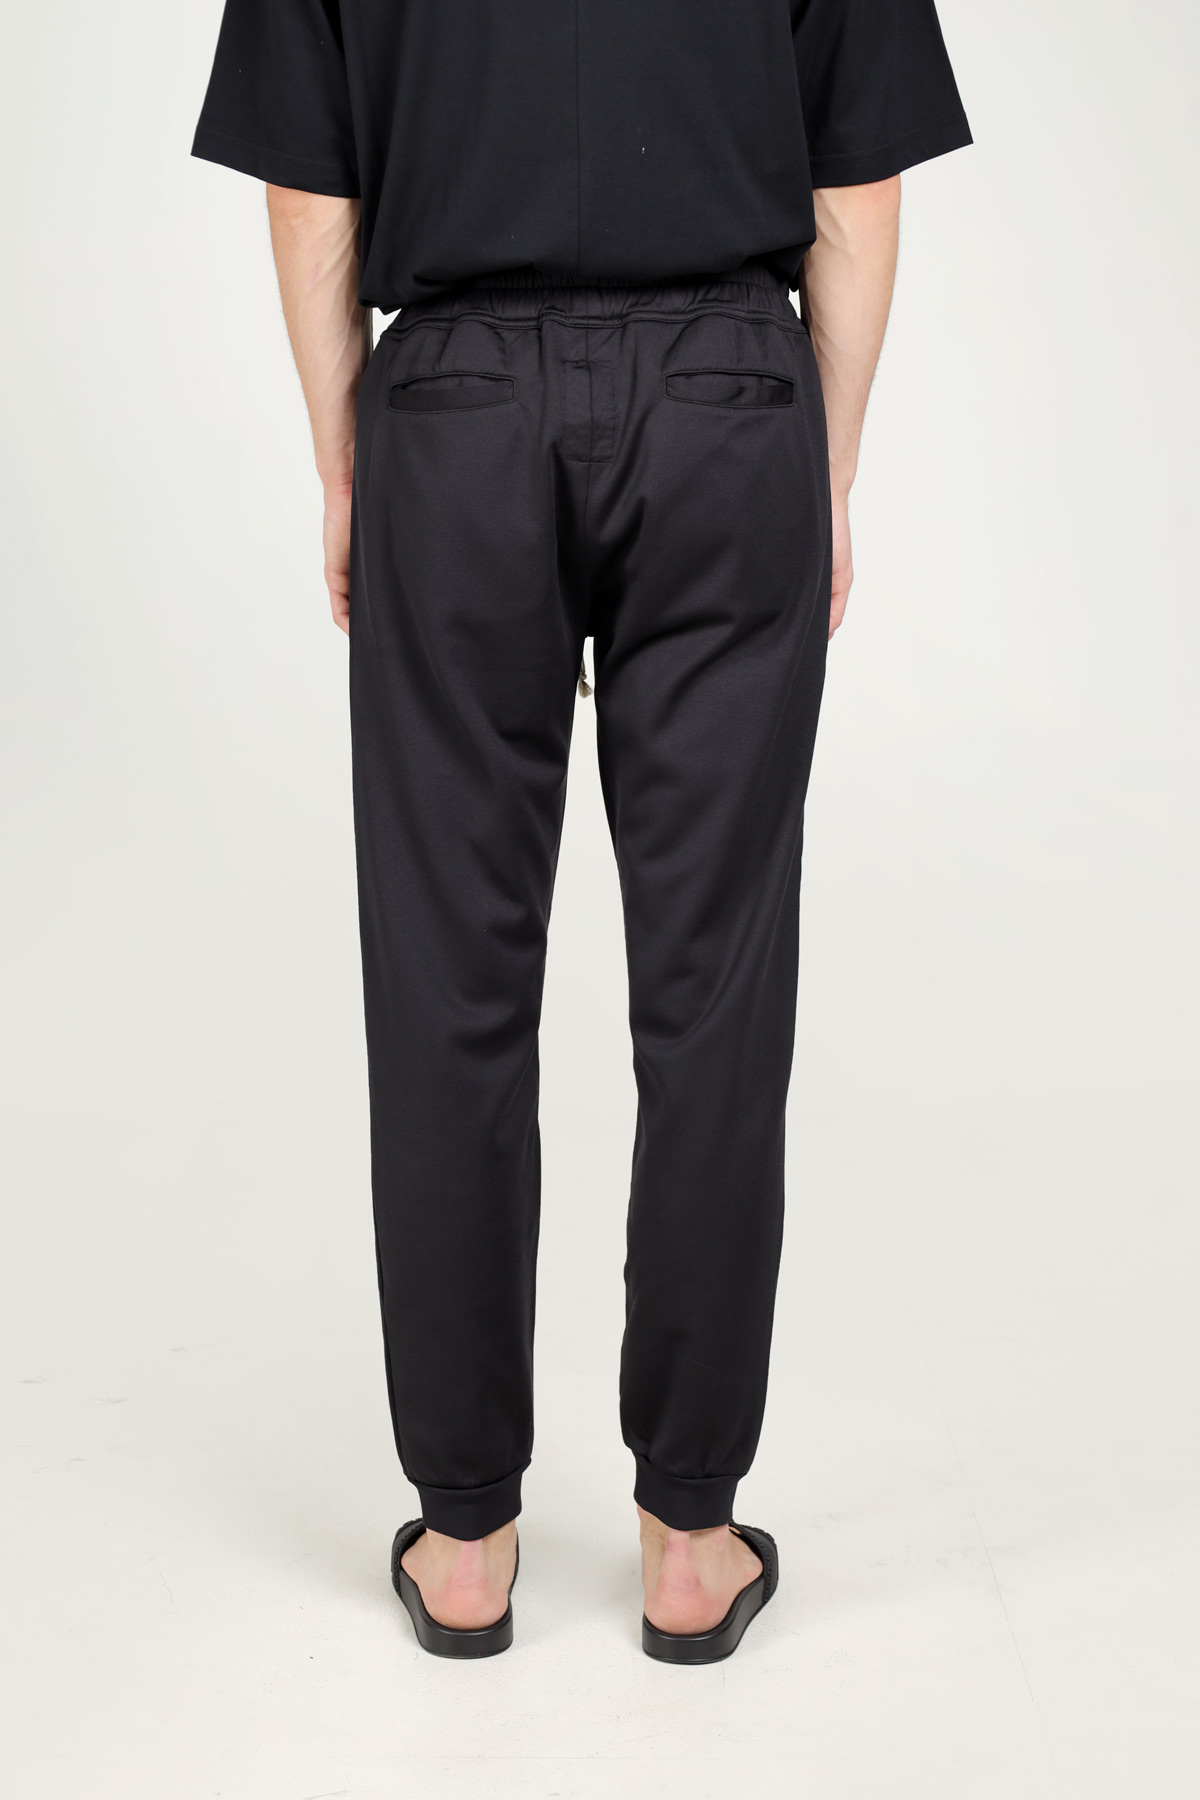 RICK OWENS x CHAMPION Men Embroidered Logo Trousers in Black 2